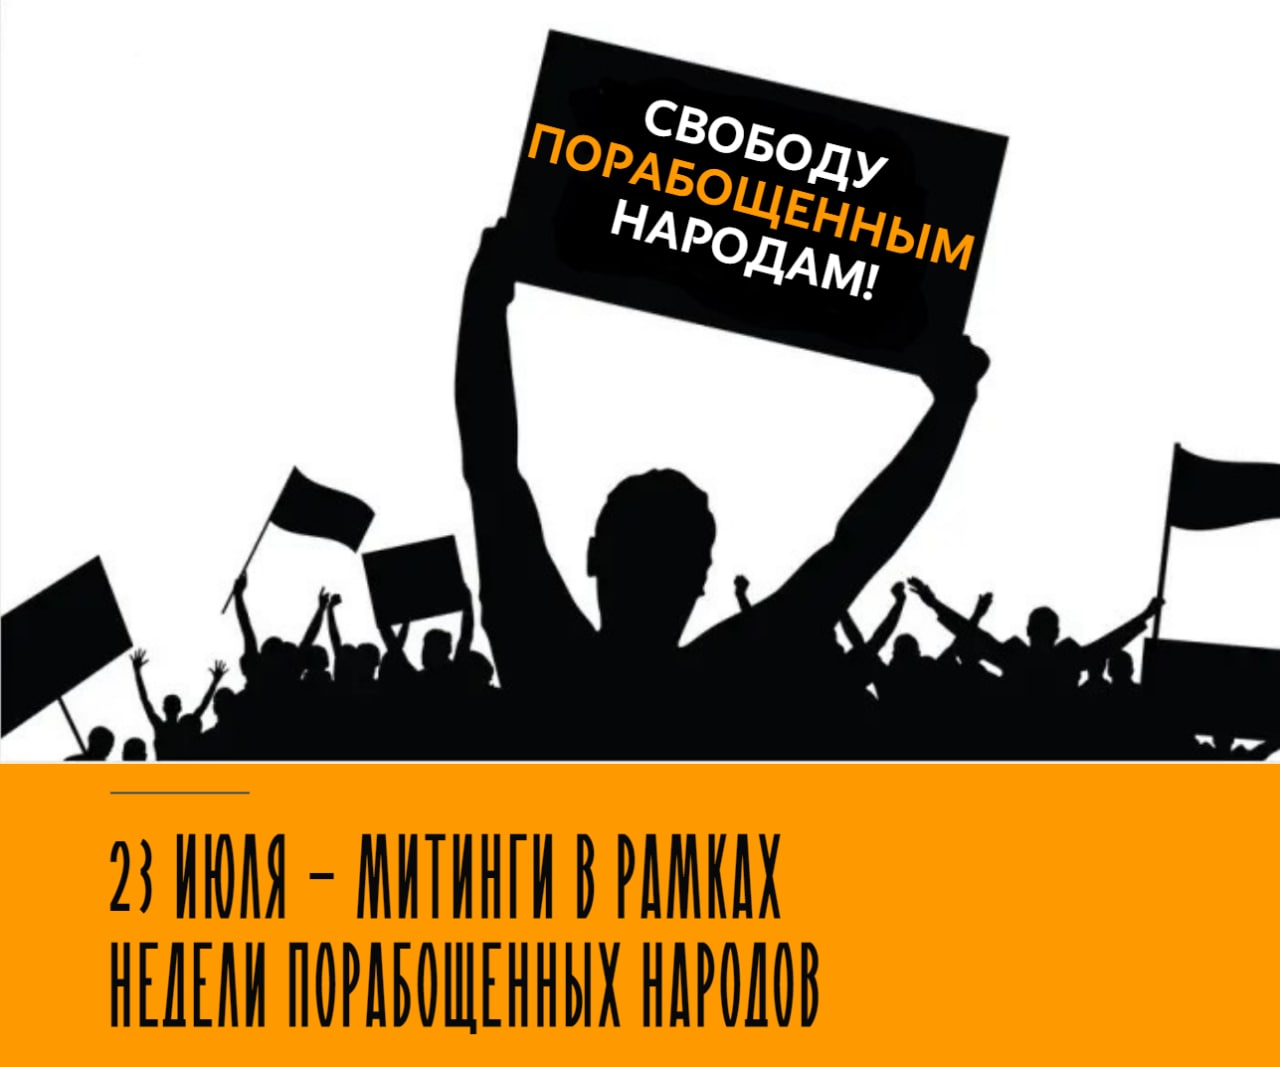 “Freedom to the nations! Freedom to Man!” Rallies will be held in a number of russian cities